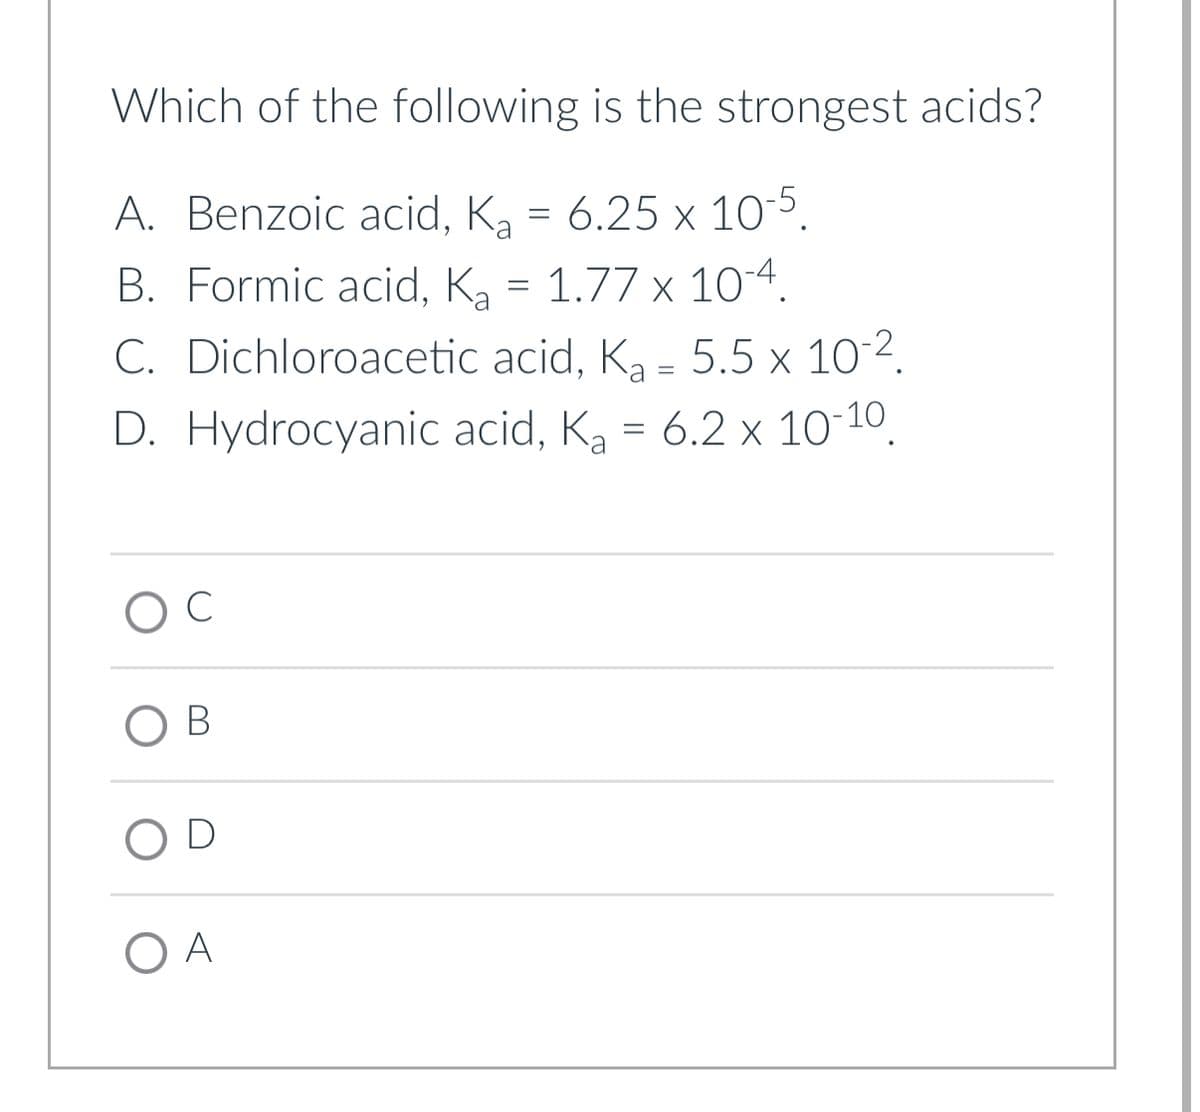 Which of the following is the strongest acids?
A. Benzoic acid, K₂ = 6.25 x 10-5.
B. Formic acid, K₂ = 1.77 x 10-4.
Ka
C. Dichloroacetic acid, K₂ = 5.5 x 10-².
D. Hydrocyanic acid, K₂ = 6.2 x 10-10.
Ka
O C
OB
OD
O A